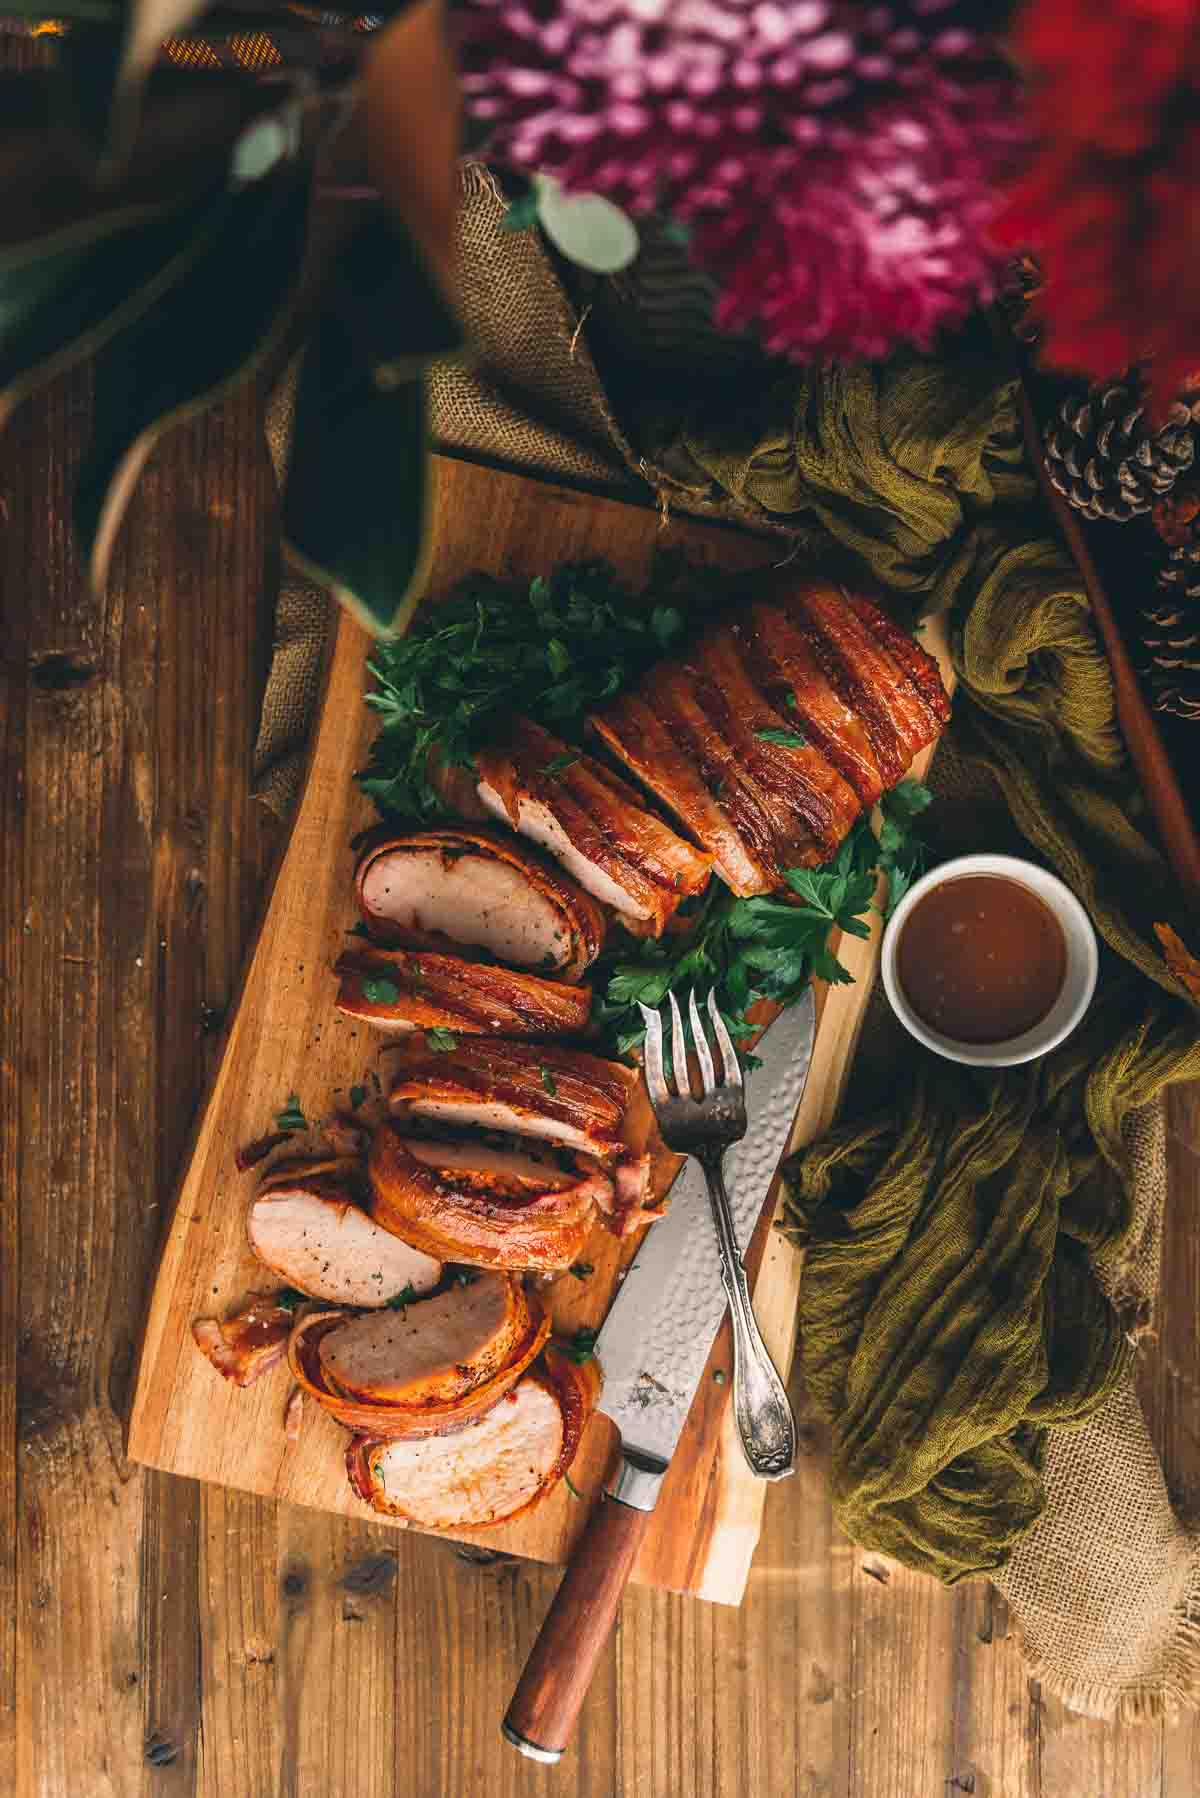 Overhead shot of a smoked pork loin on a cutting board, sliced.